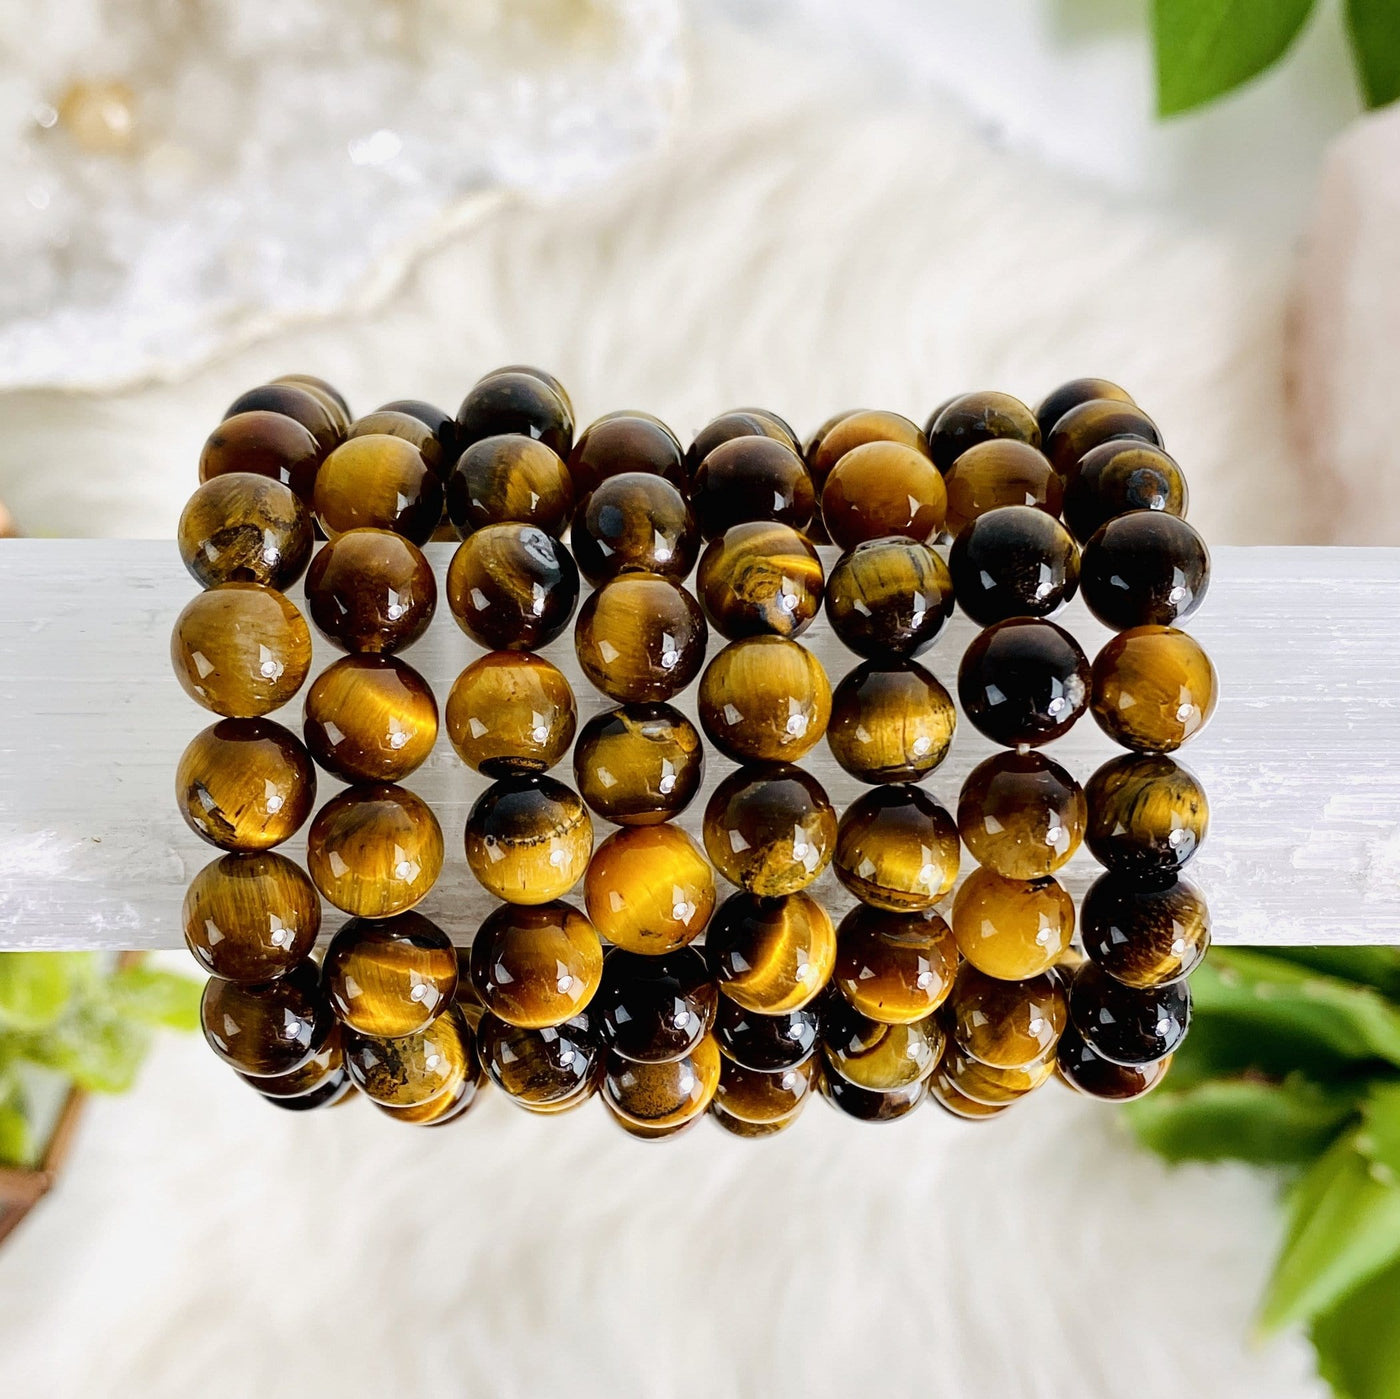 Tigers Eye Round Bead Bracelets 8mm. Tiger Eye has lovely bands of yellow-golden color through silky lusters of brown to red color. Tigers Eye is known as the “POWER STONE”. This is a powerful stone that aids harmony and balance, helping to release anxiety and fear.